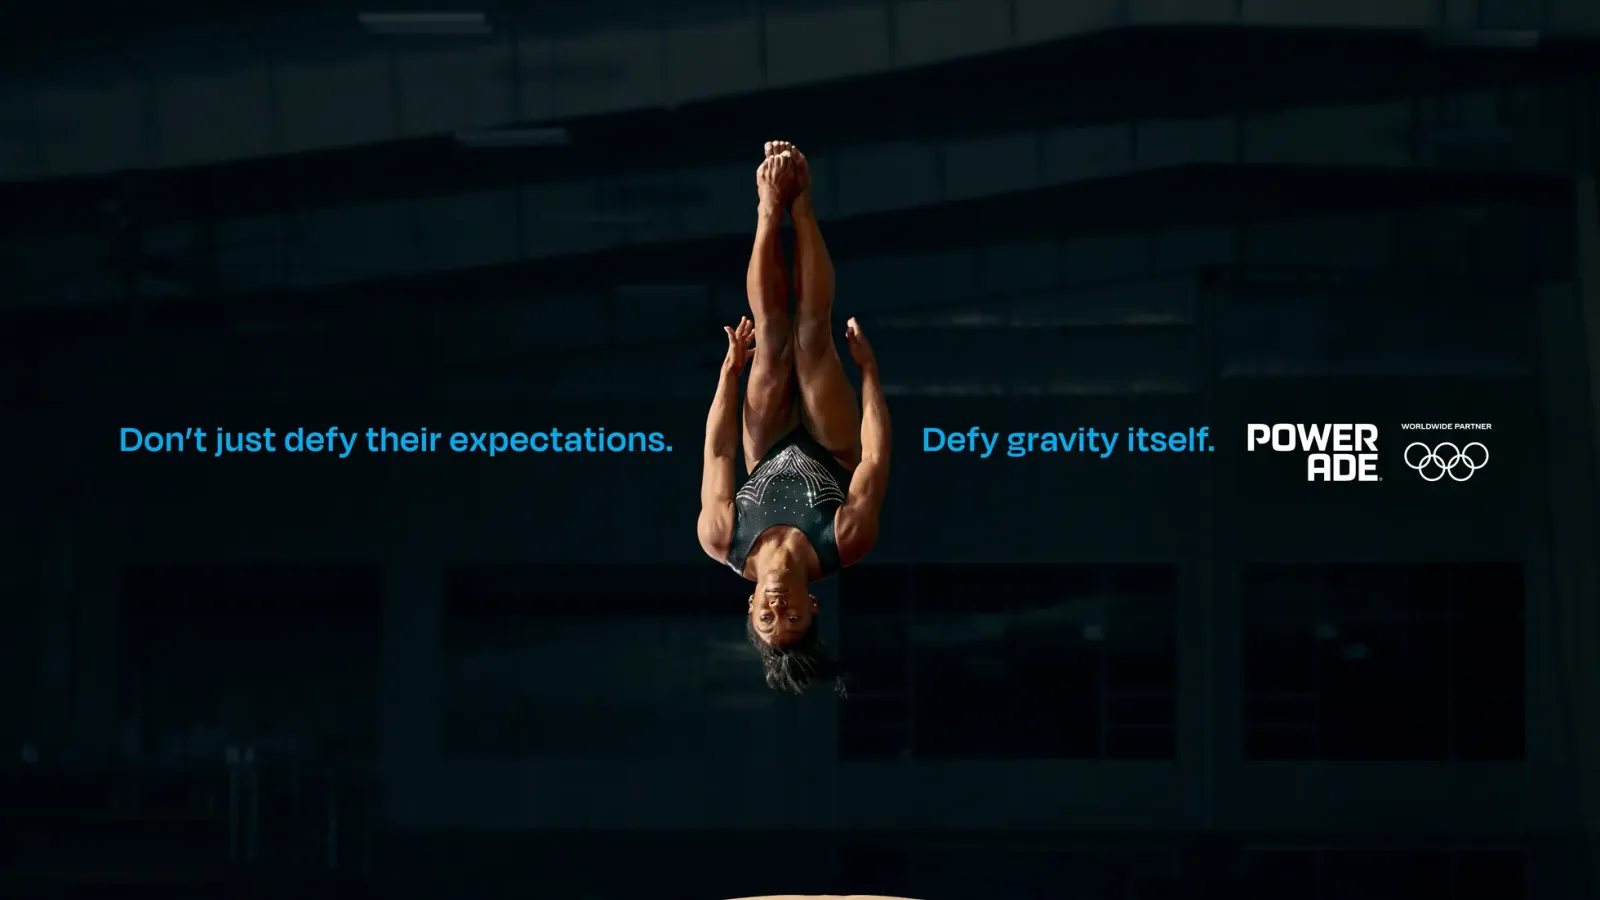 Athlete performing mid-air flip in Powerade Olympic advertising campaign with motivational slogans